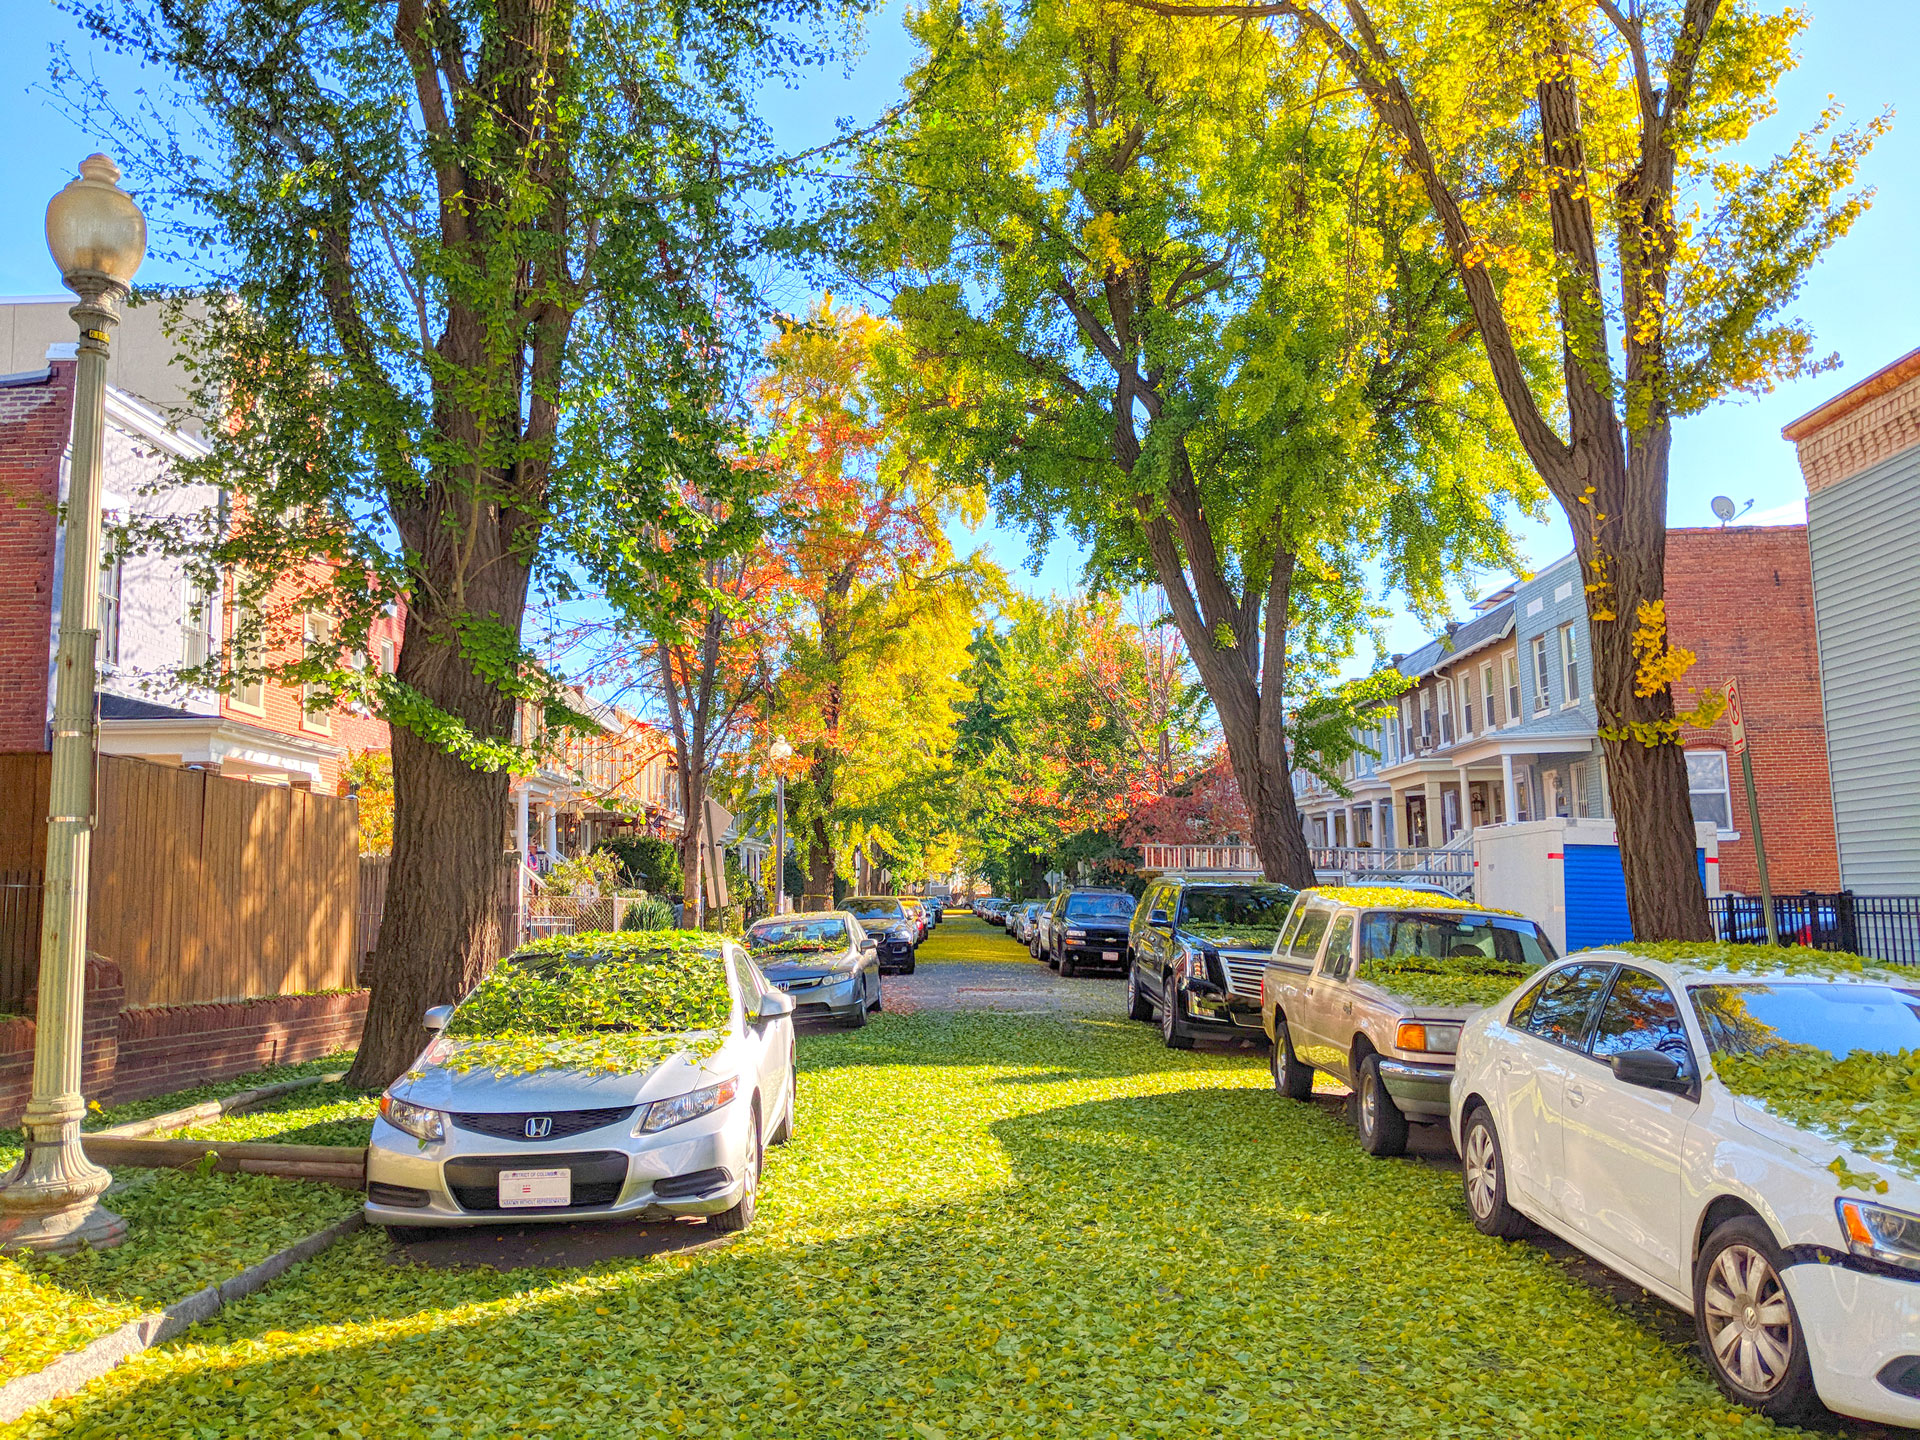 Photo of Orleans Place NE. The street is lined with ginkgo trees. Leaves are a mix of autumn colors (green, yellow, and reds).